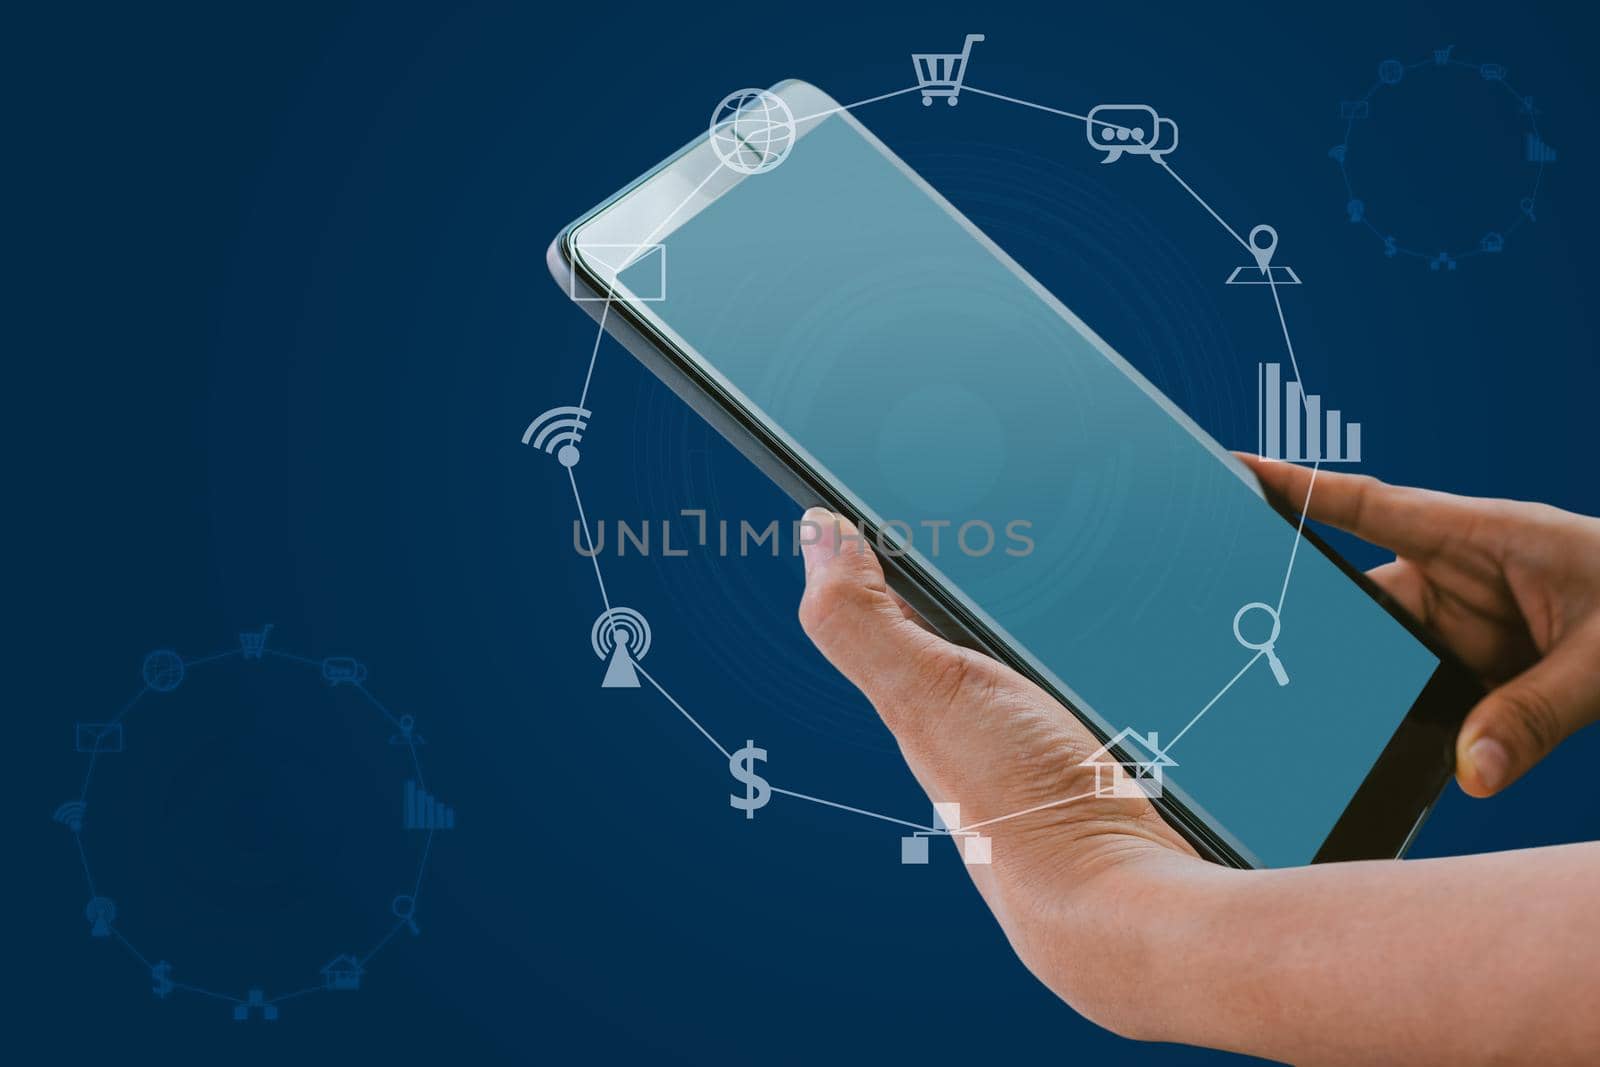 Hand holding tablet with blurred social media and technology icons on blue color background.